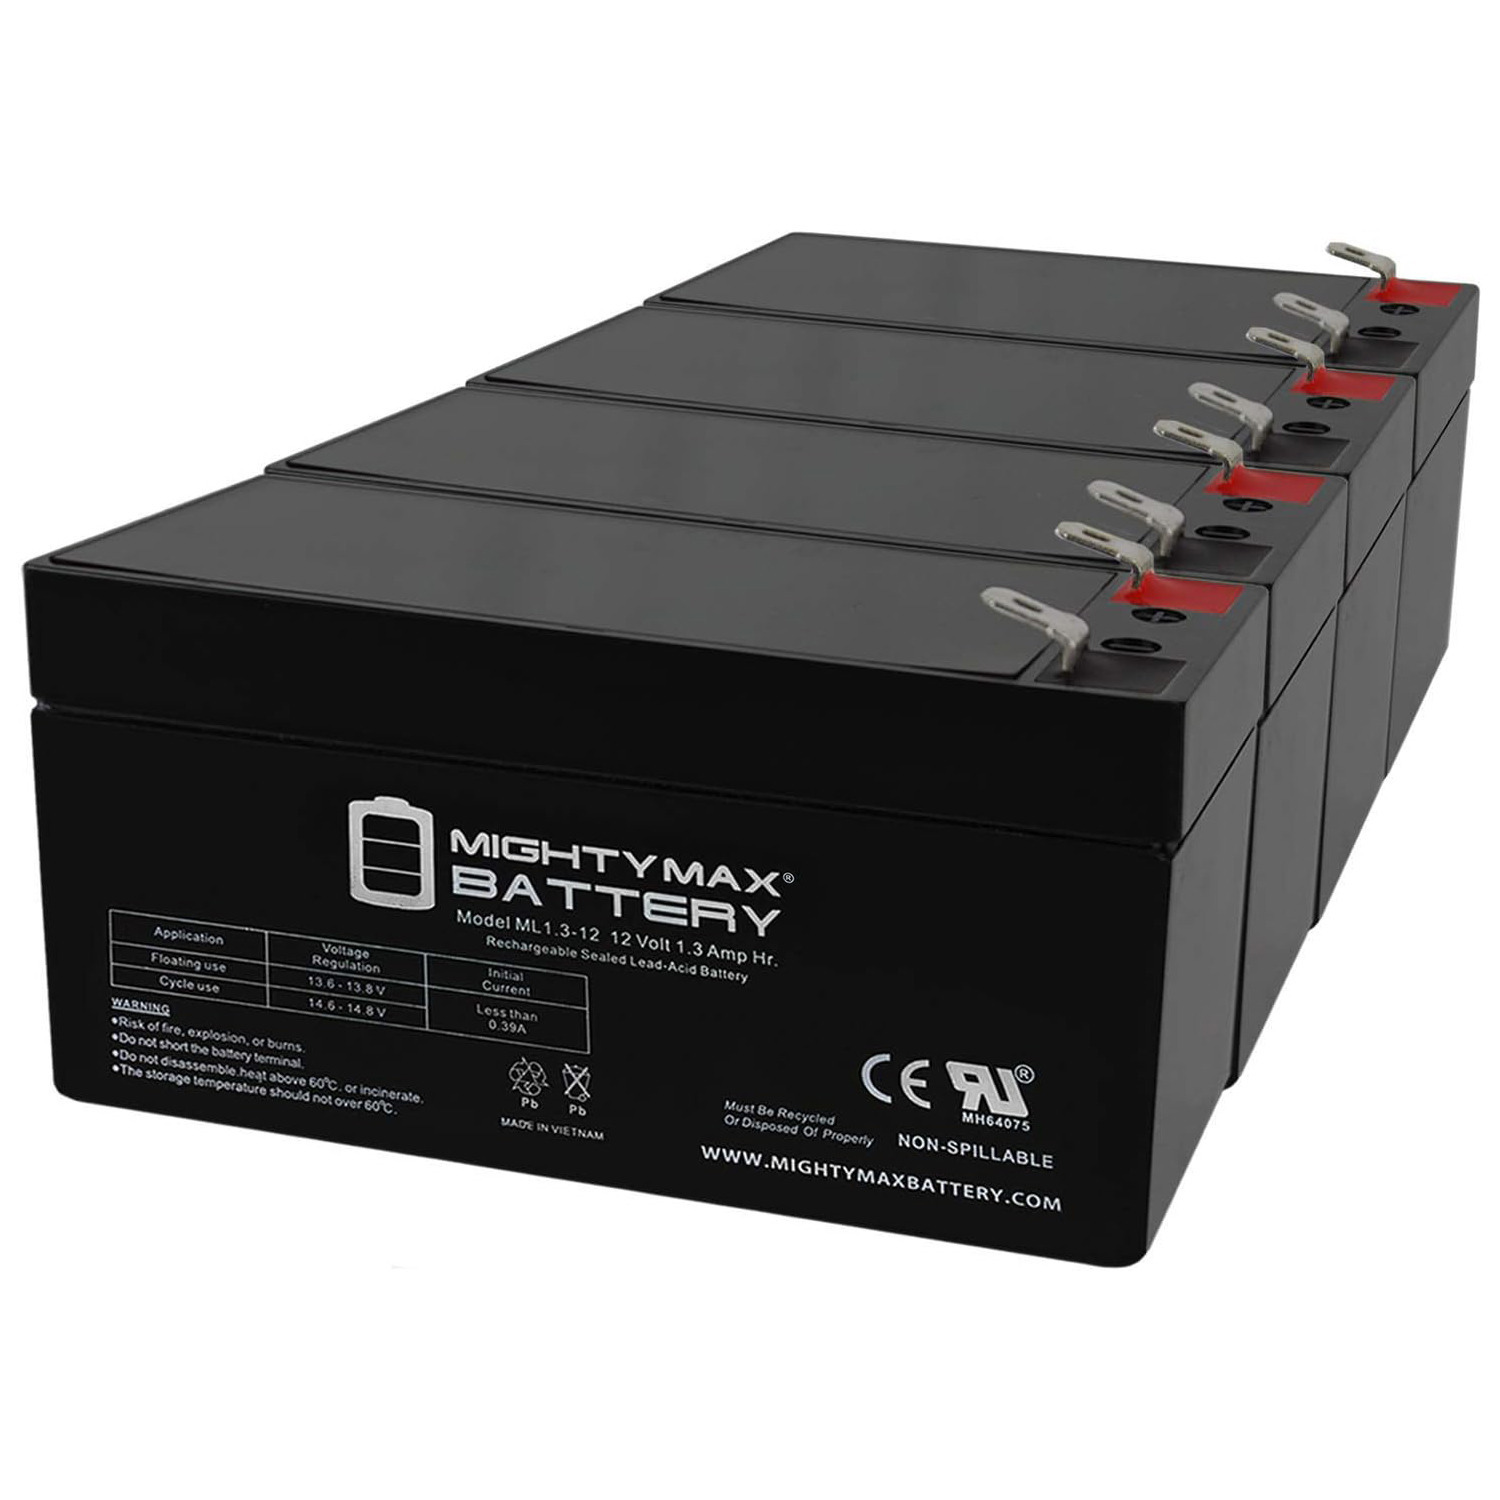 12V 1.3Ah Replacement Battery for Kijo JS12-1.3 - 4 Pack